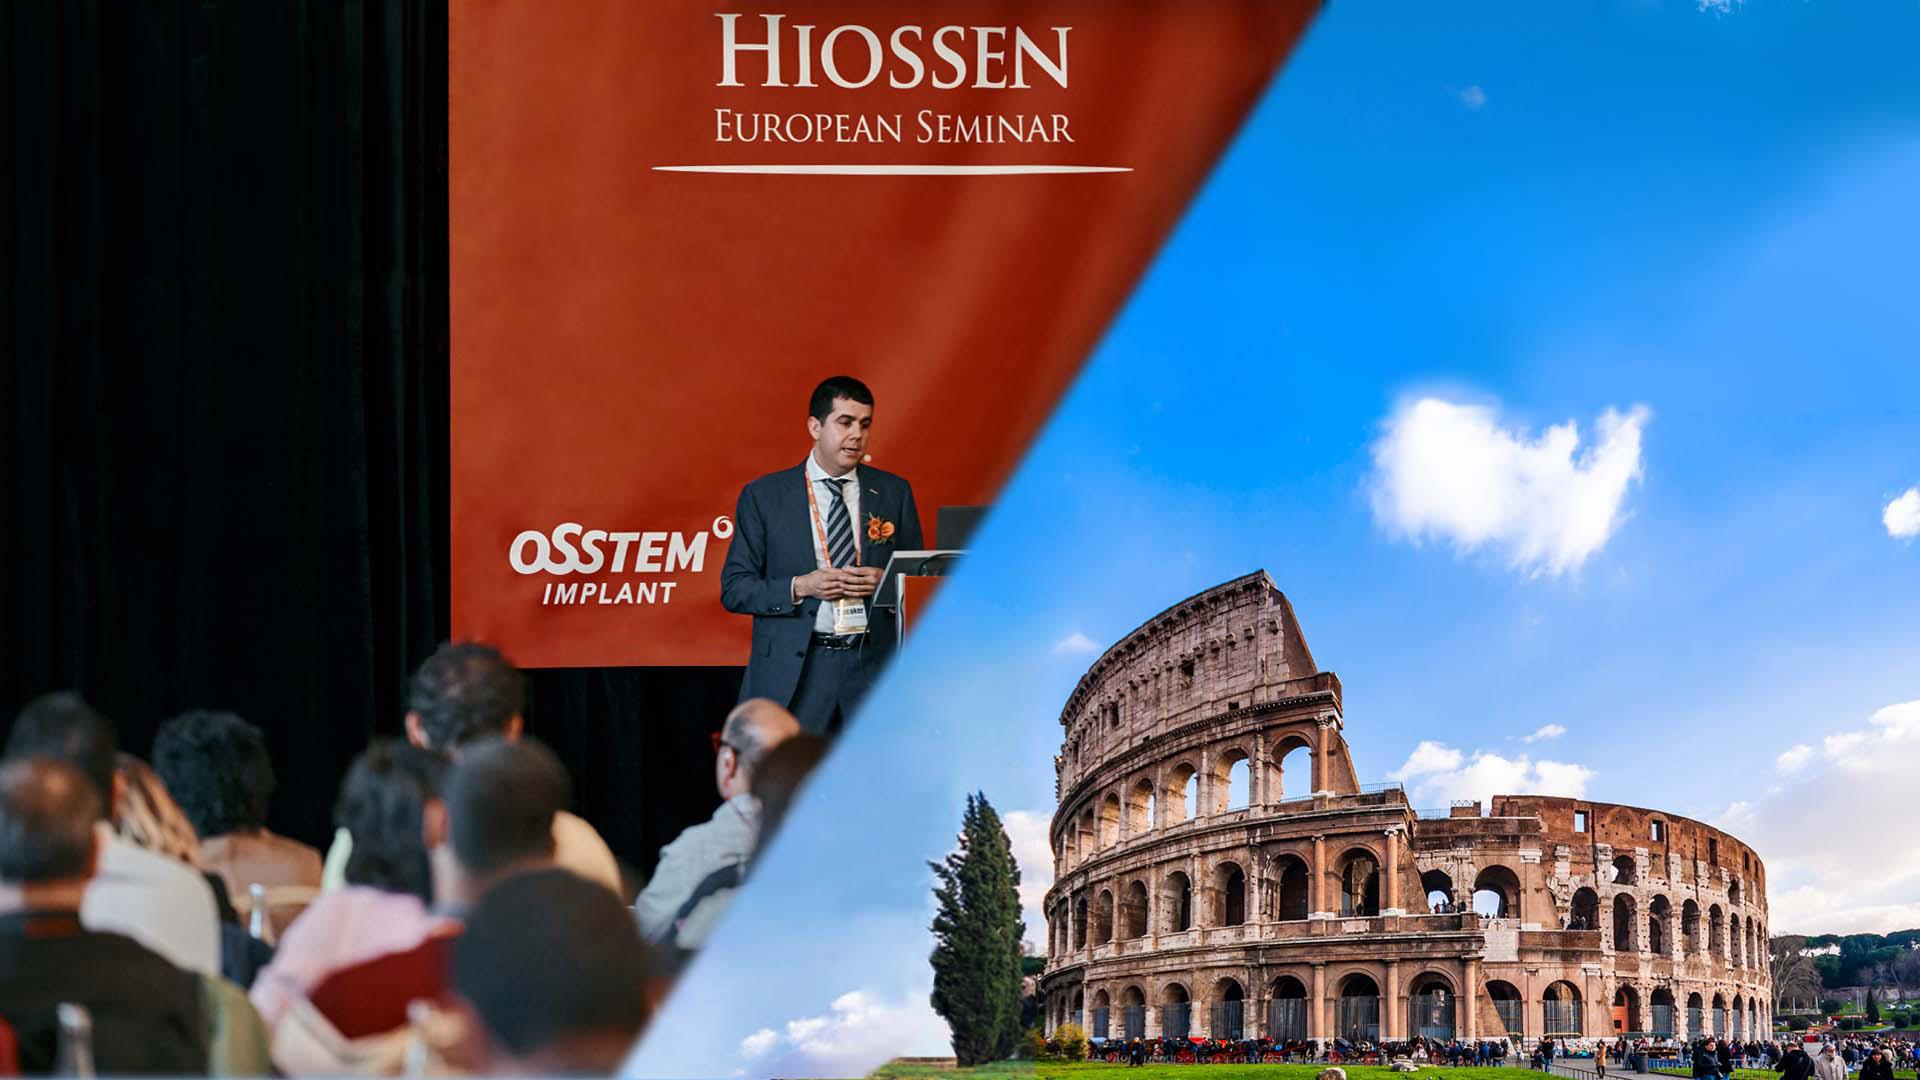 In October, the Osstem-Hiossen Meeting in Europe will take place in Rome in Italy. (Image: Osstem Implant)